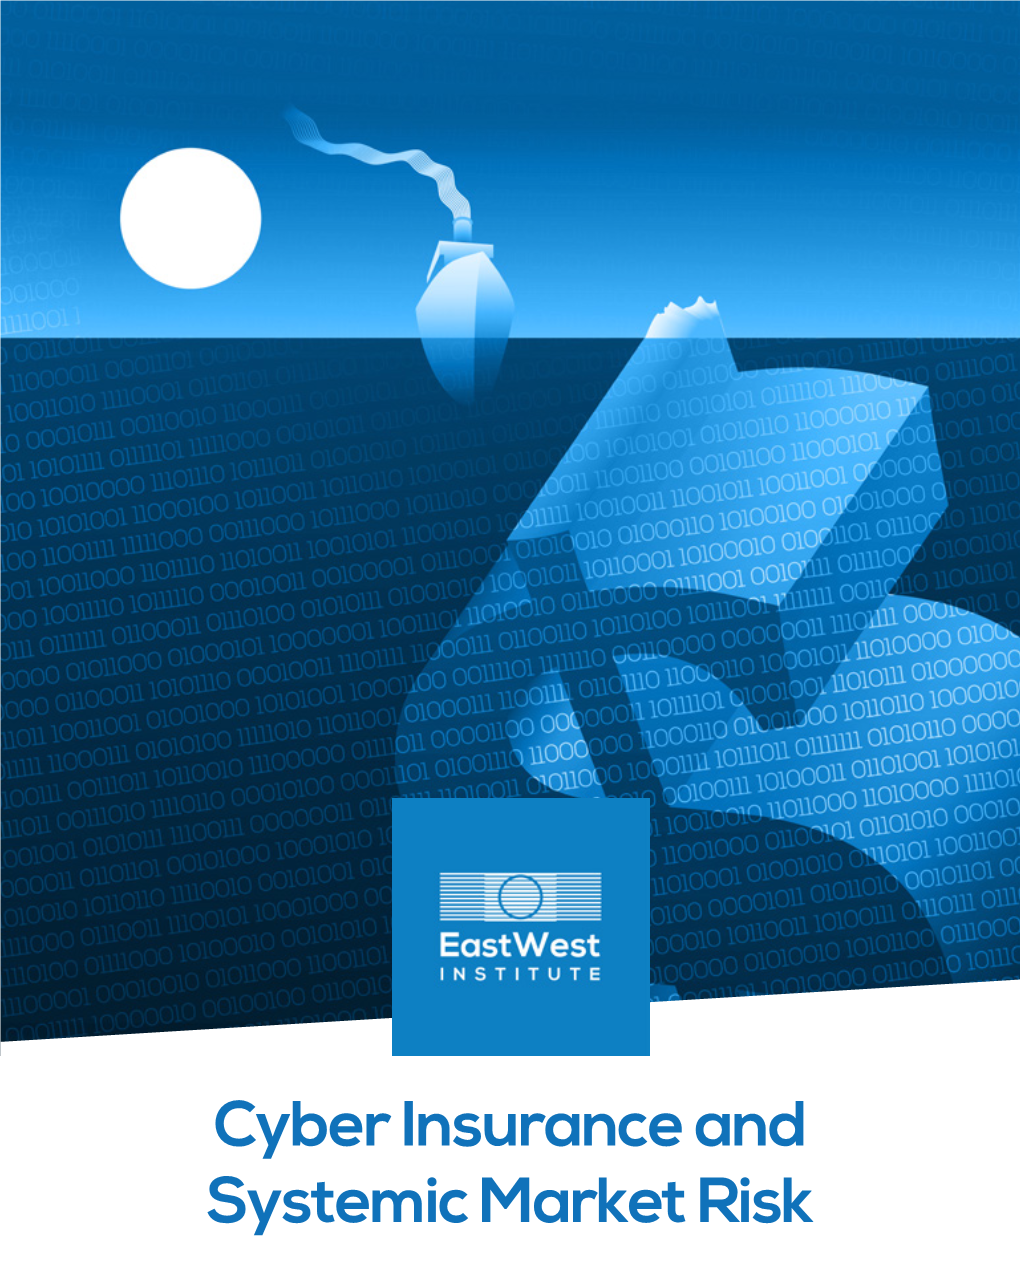 Cyber Insurance and Systemic Market Risk DATE: EVENT: June 2017 Notpetya